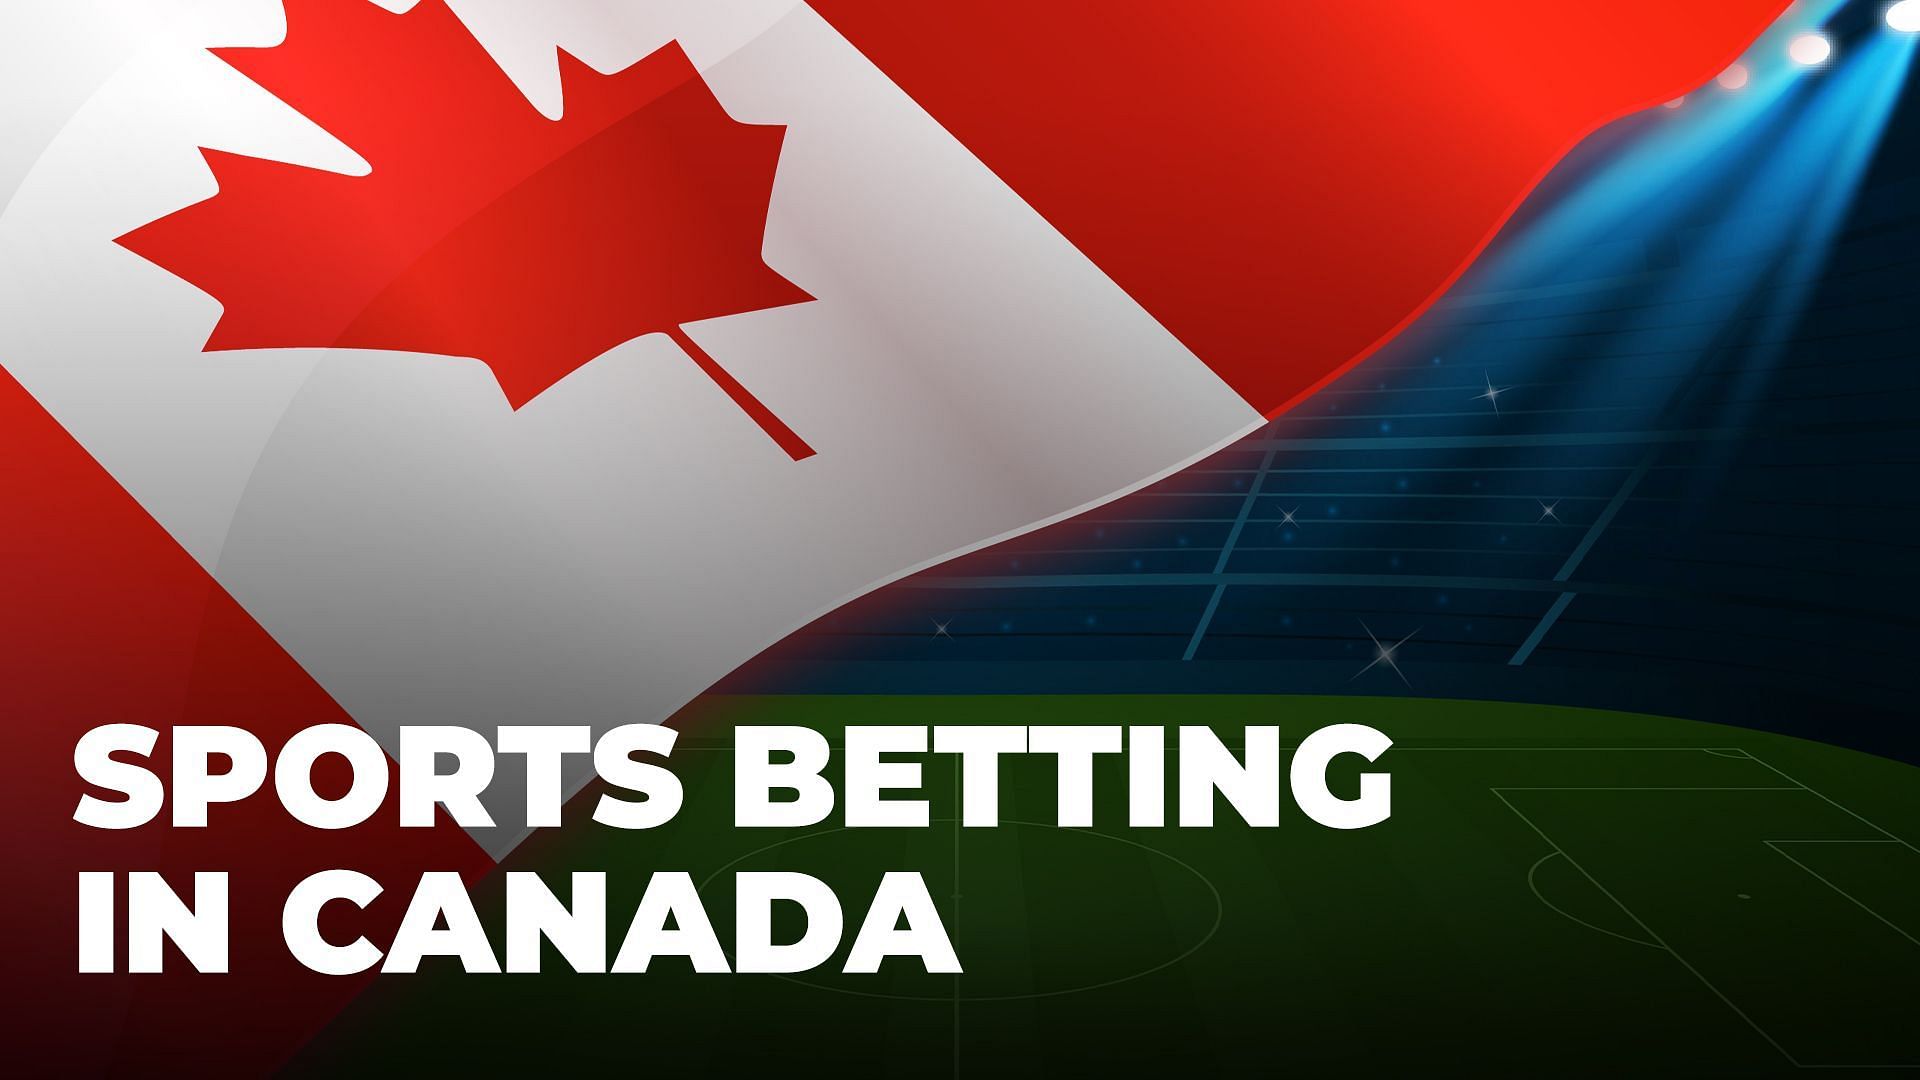 Roblox has a sportsbook gambling game now? Is this even legal? : r